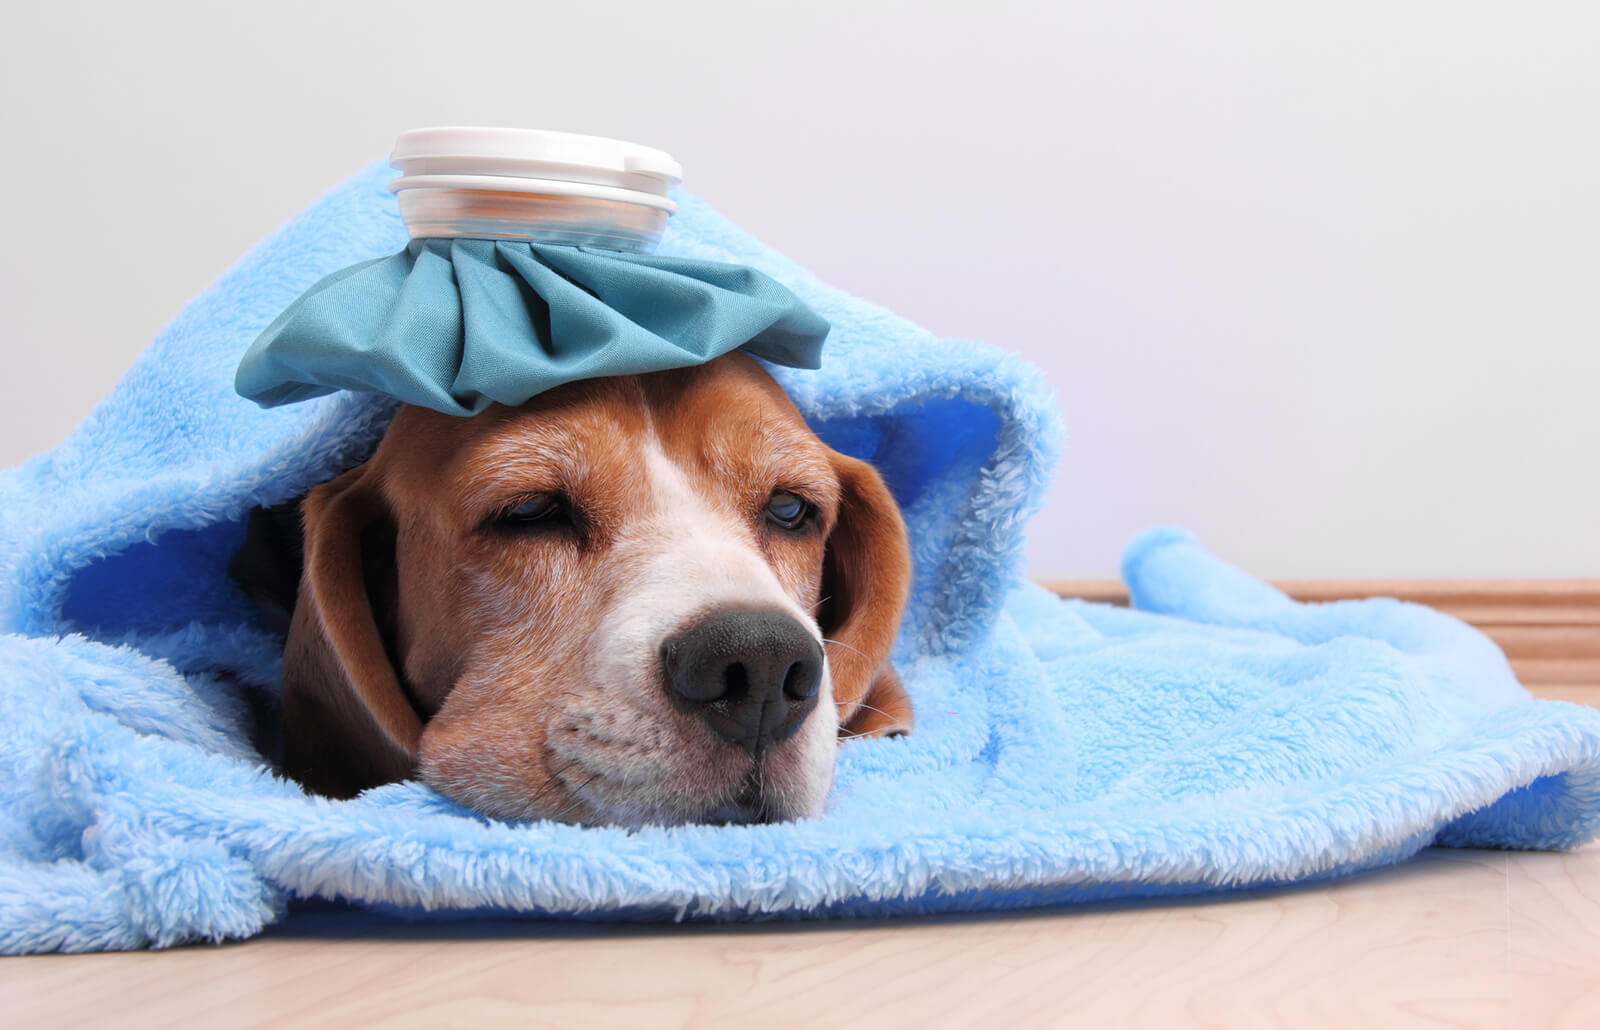 Can Dogs Get Colds